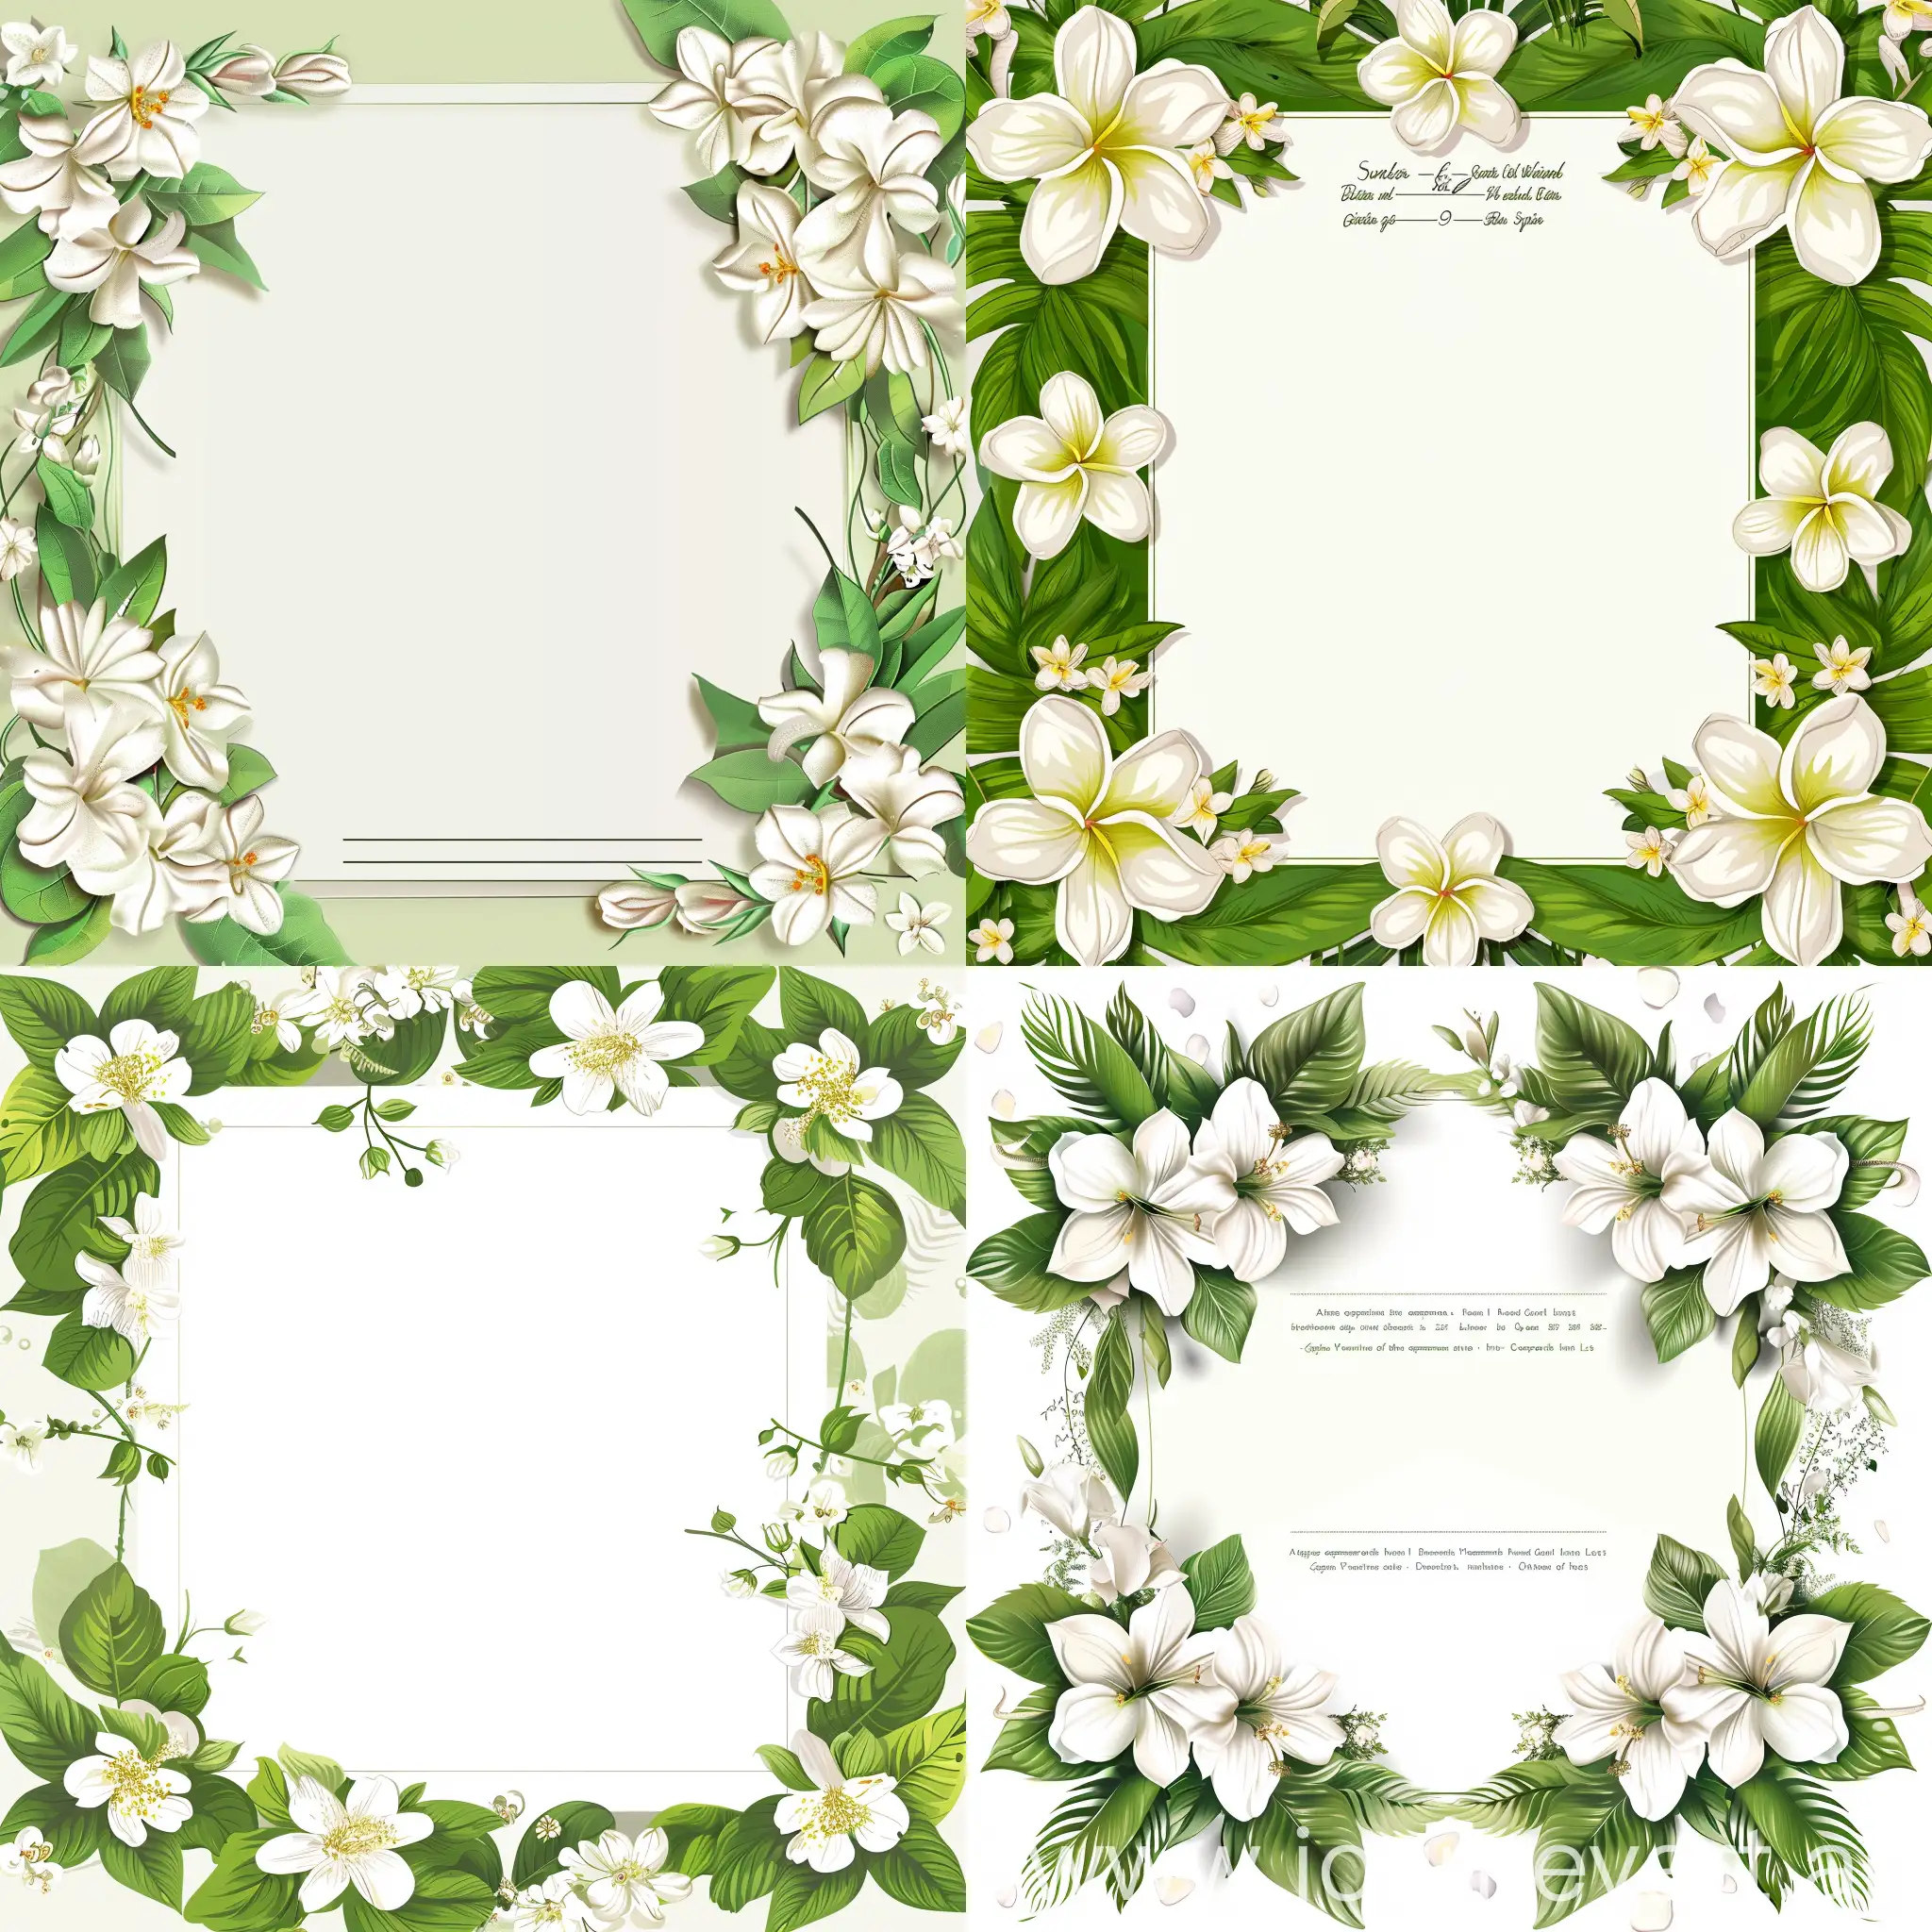 A beautiful wedding card made in white and green style with lush flowers at the corners of the picture and a white background in the middle to fill in the guest list